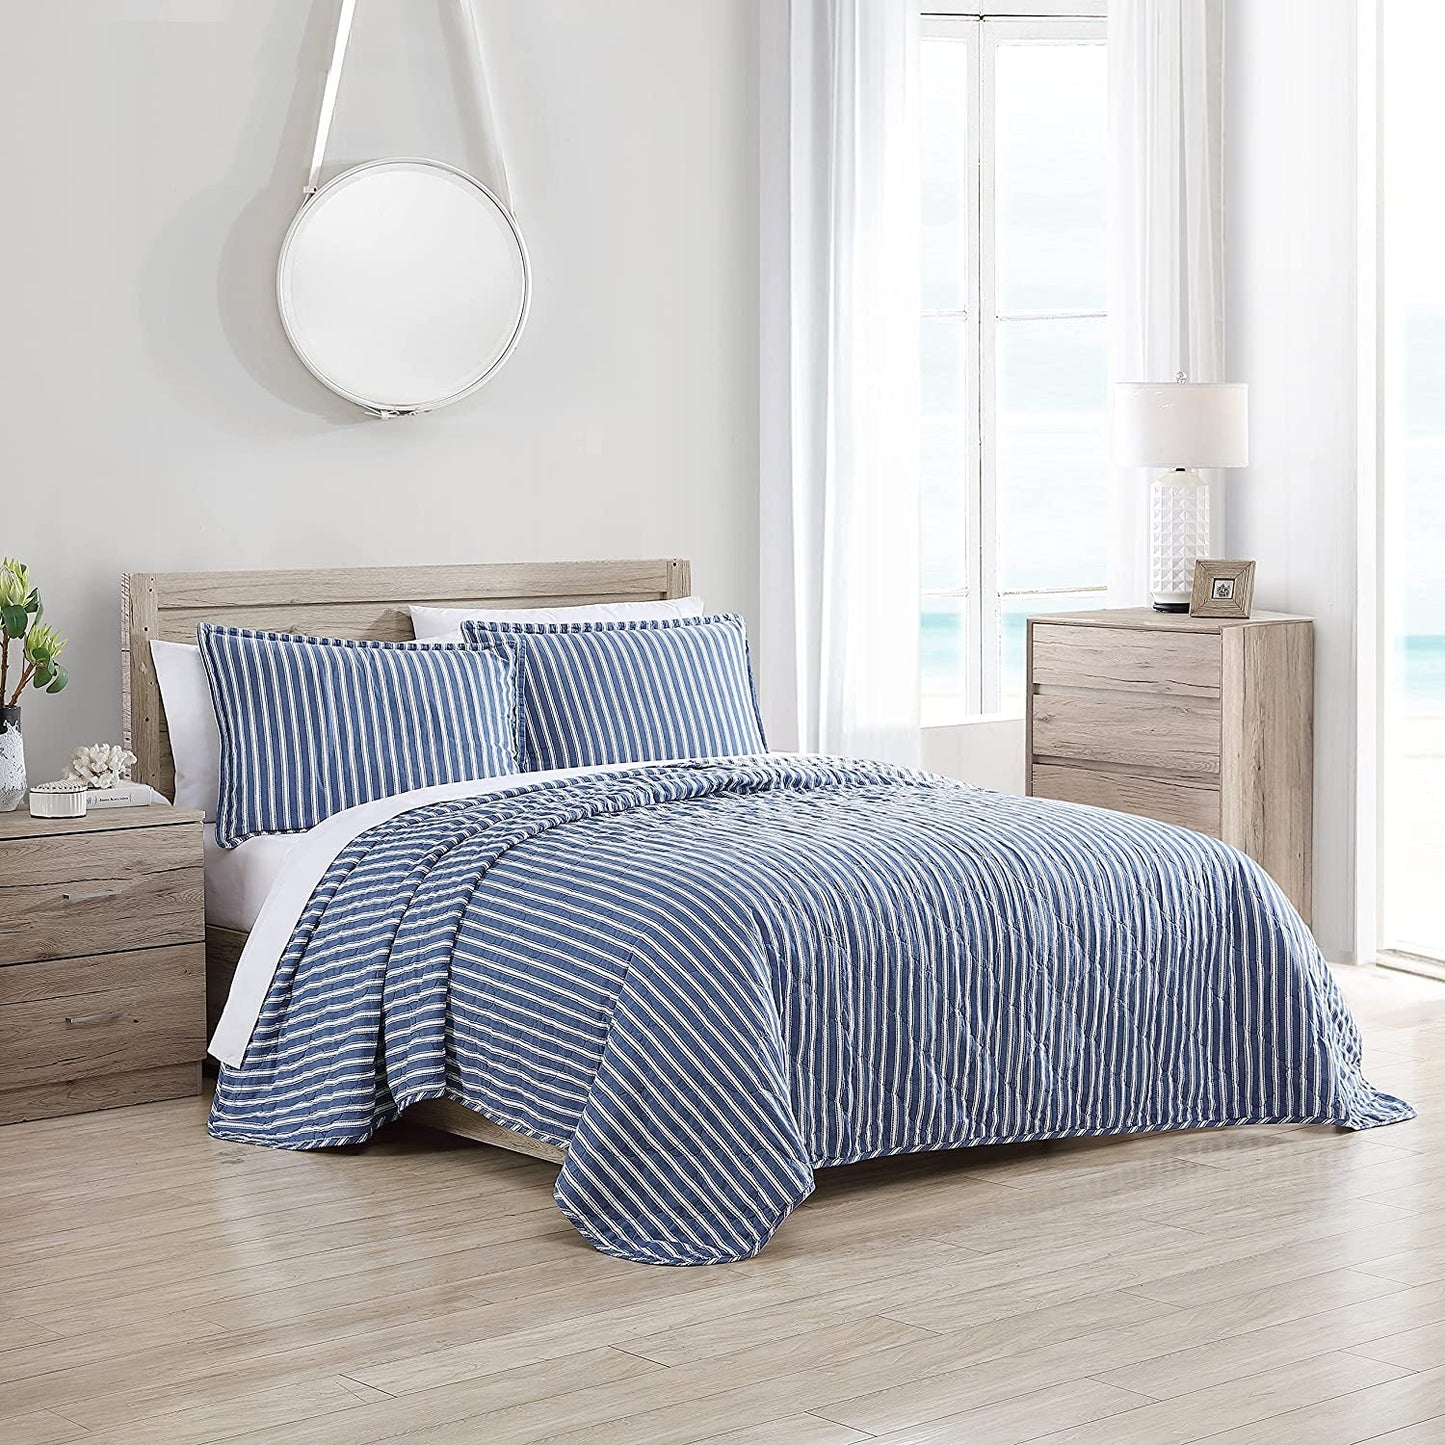 Stone Cottage | Willow Way Collection | Quilt Set-100% Cotton, Reversible, Lightweight & Breathable Bedding with Matching Shams, Pre-Washed for Added Softness, King, Indigo